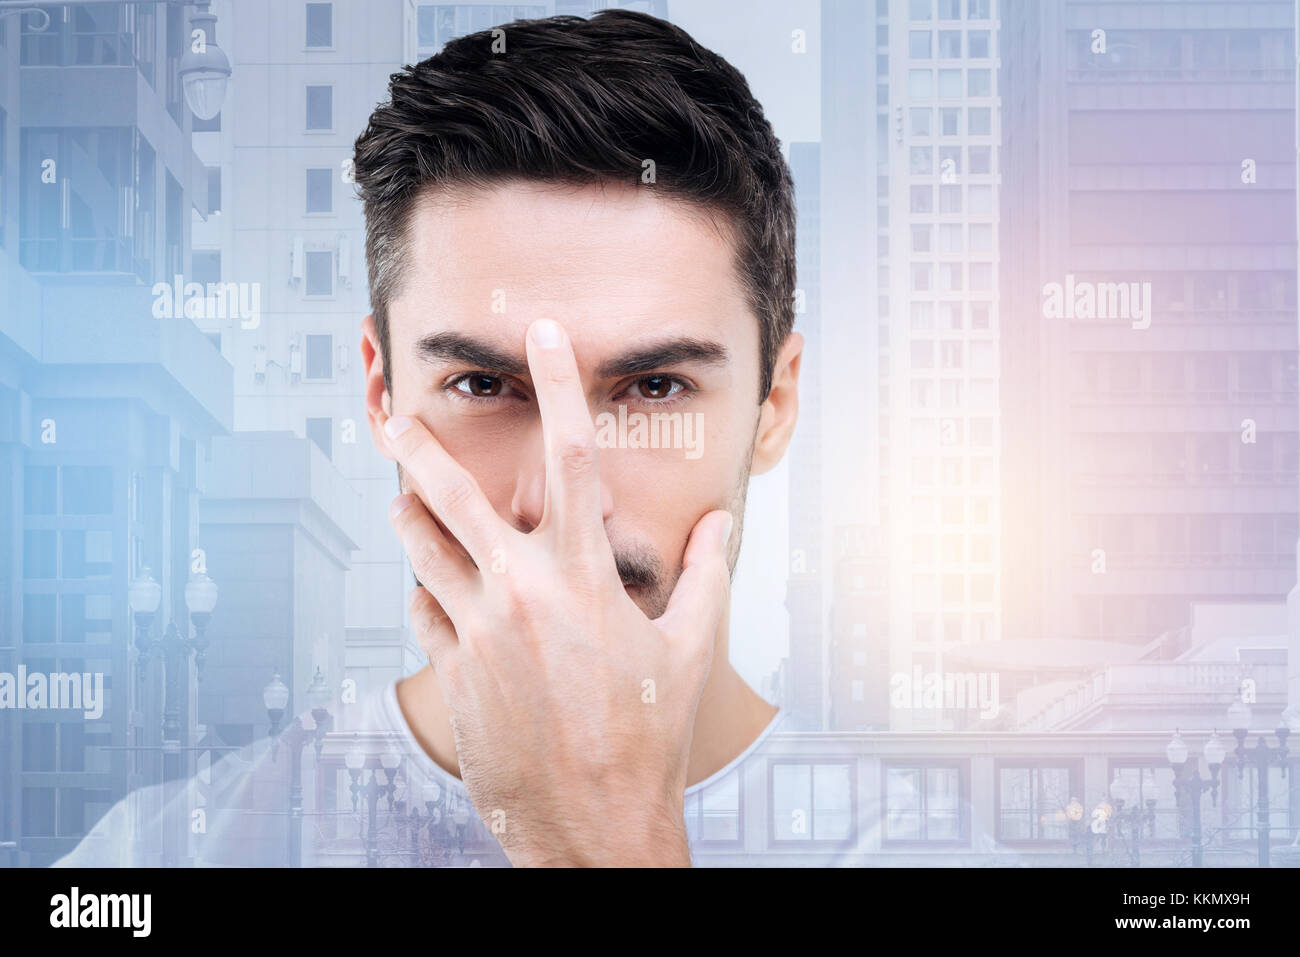 Attentive male person putting hand on his face Stock Photo